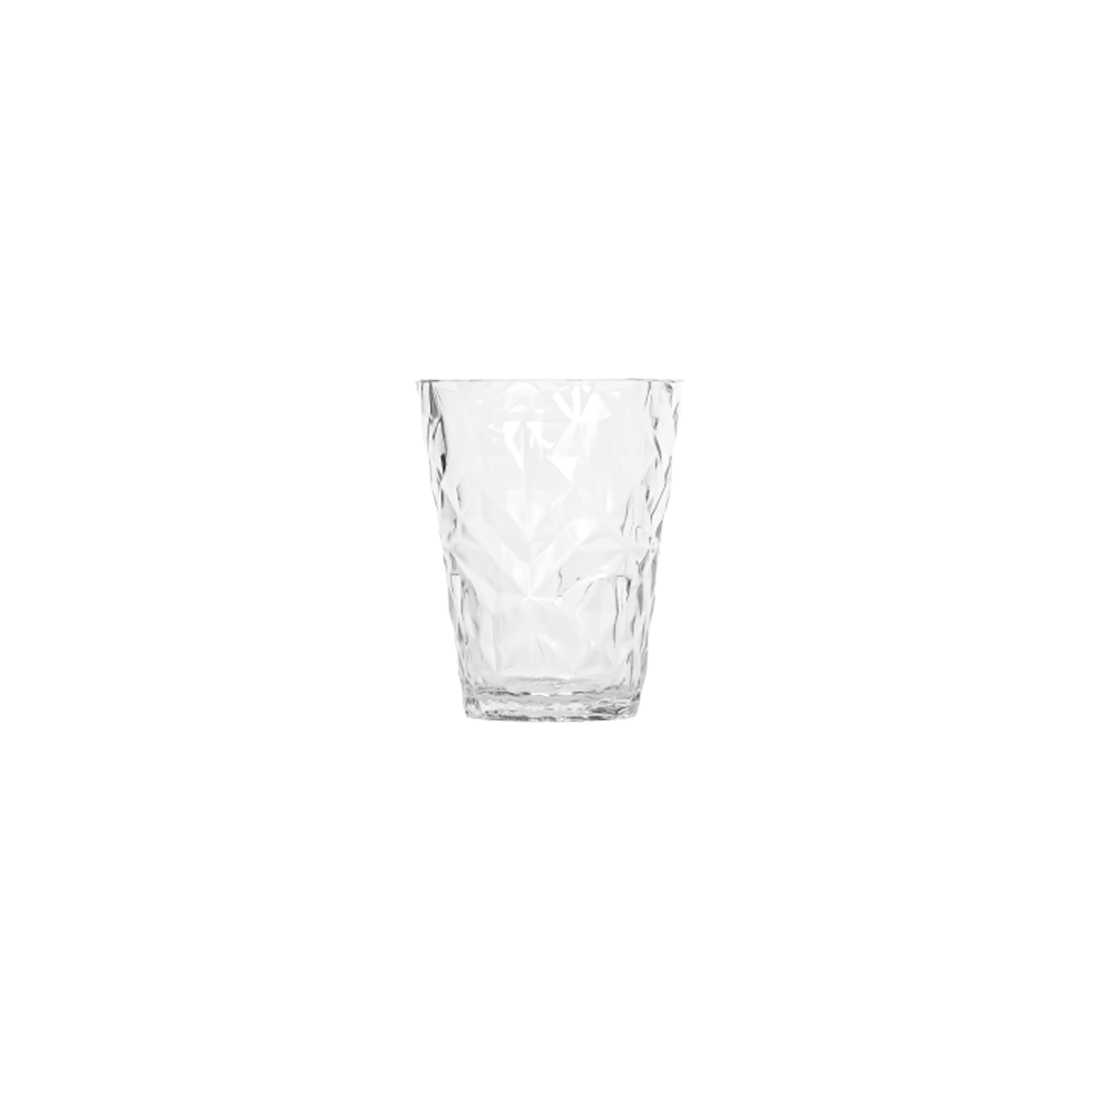 Polycarbonate Prism Unbreakable Shot Glass 4o Ml